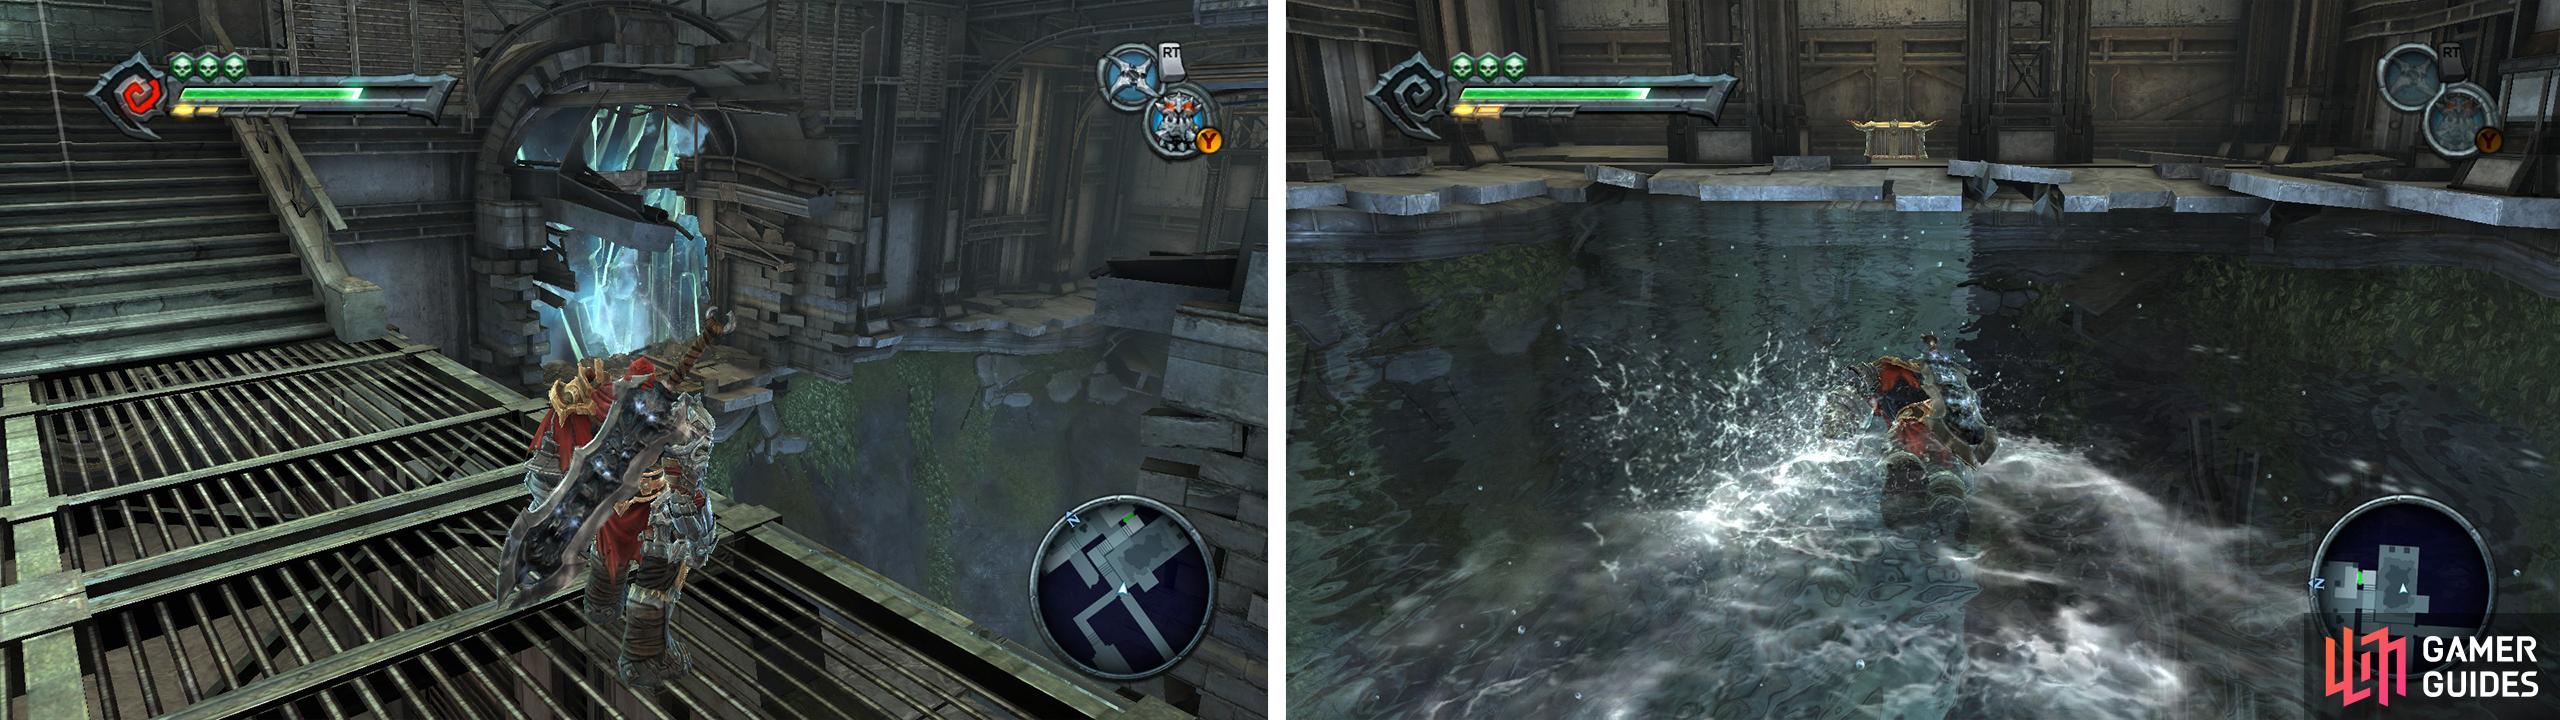 Destroy the blue crystals overlooking the pit (left). Swim across to the chest with the Dungeon Map (right)